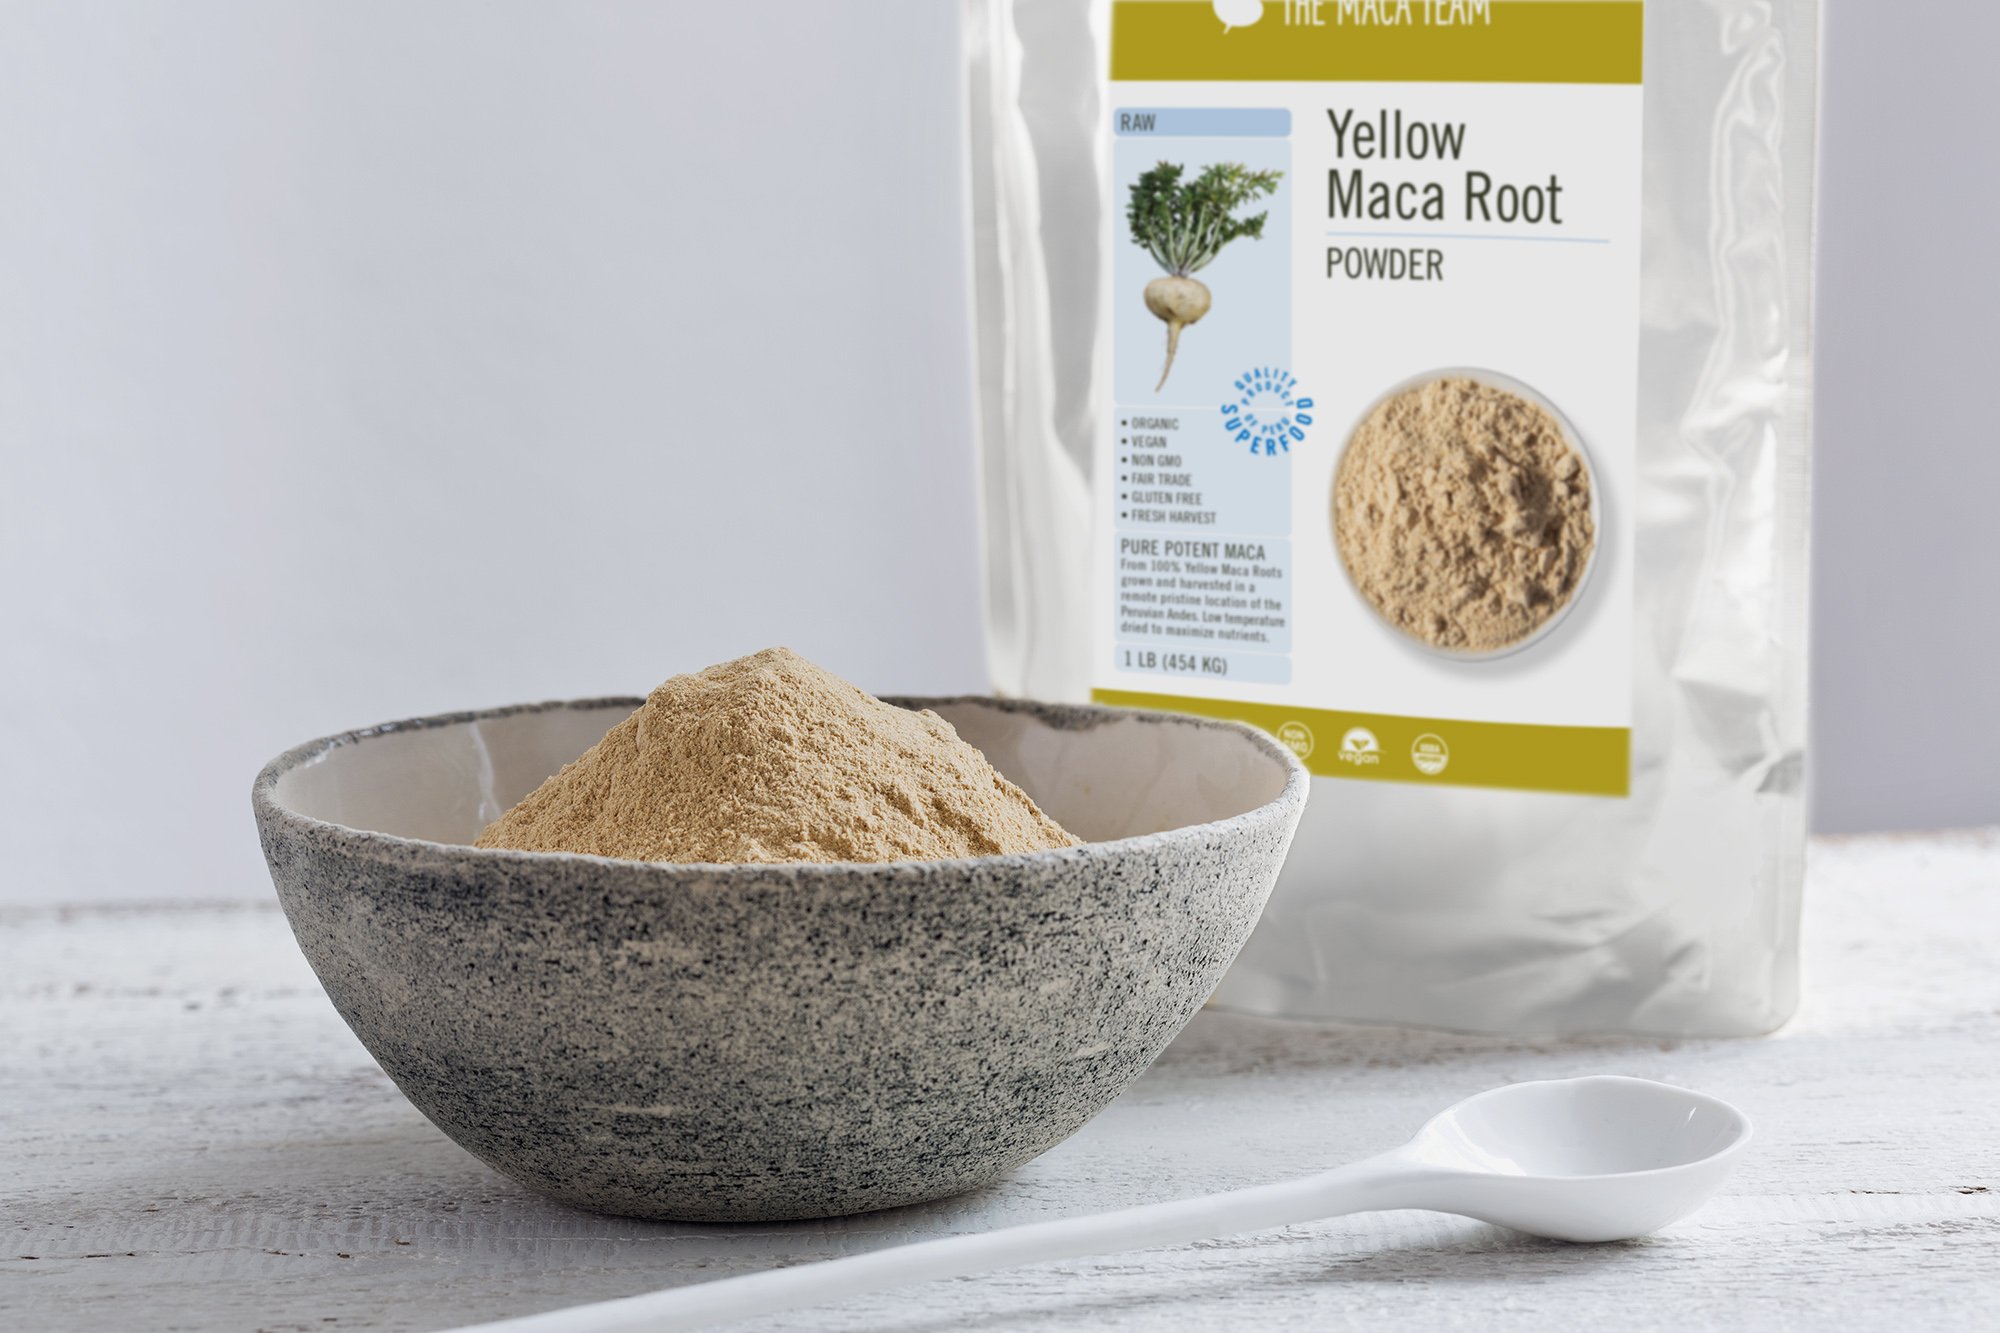 Raw Organic Yellow Maca Root Powder available a TheMacaTeam.com.